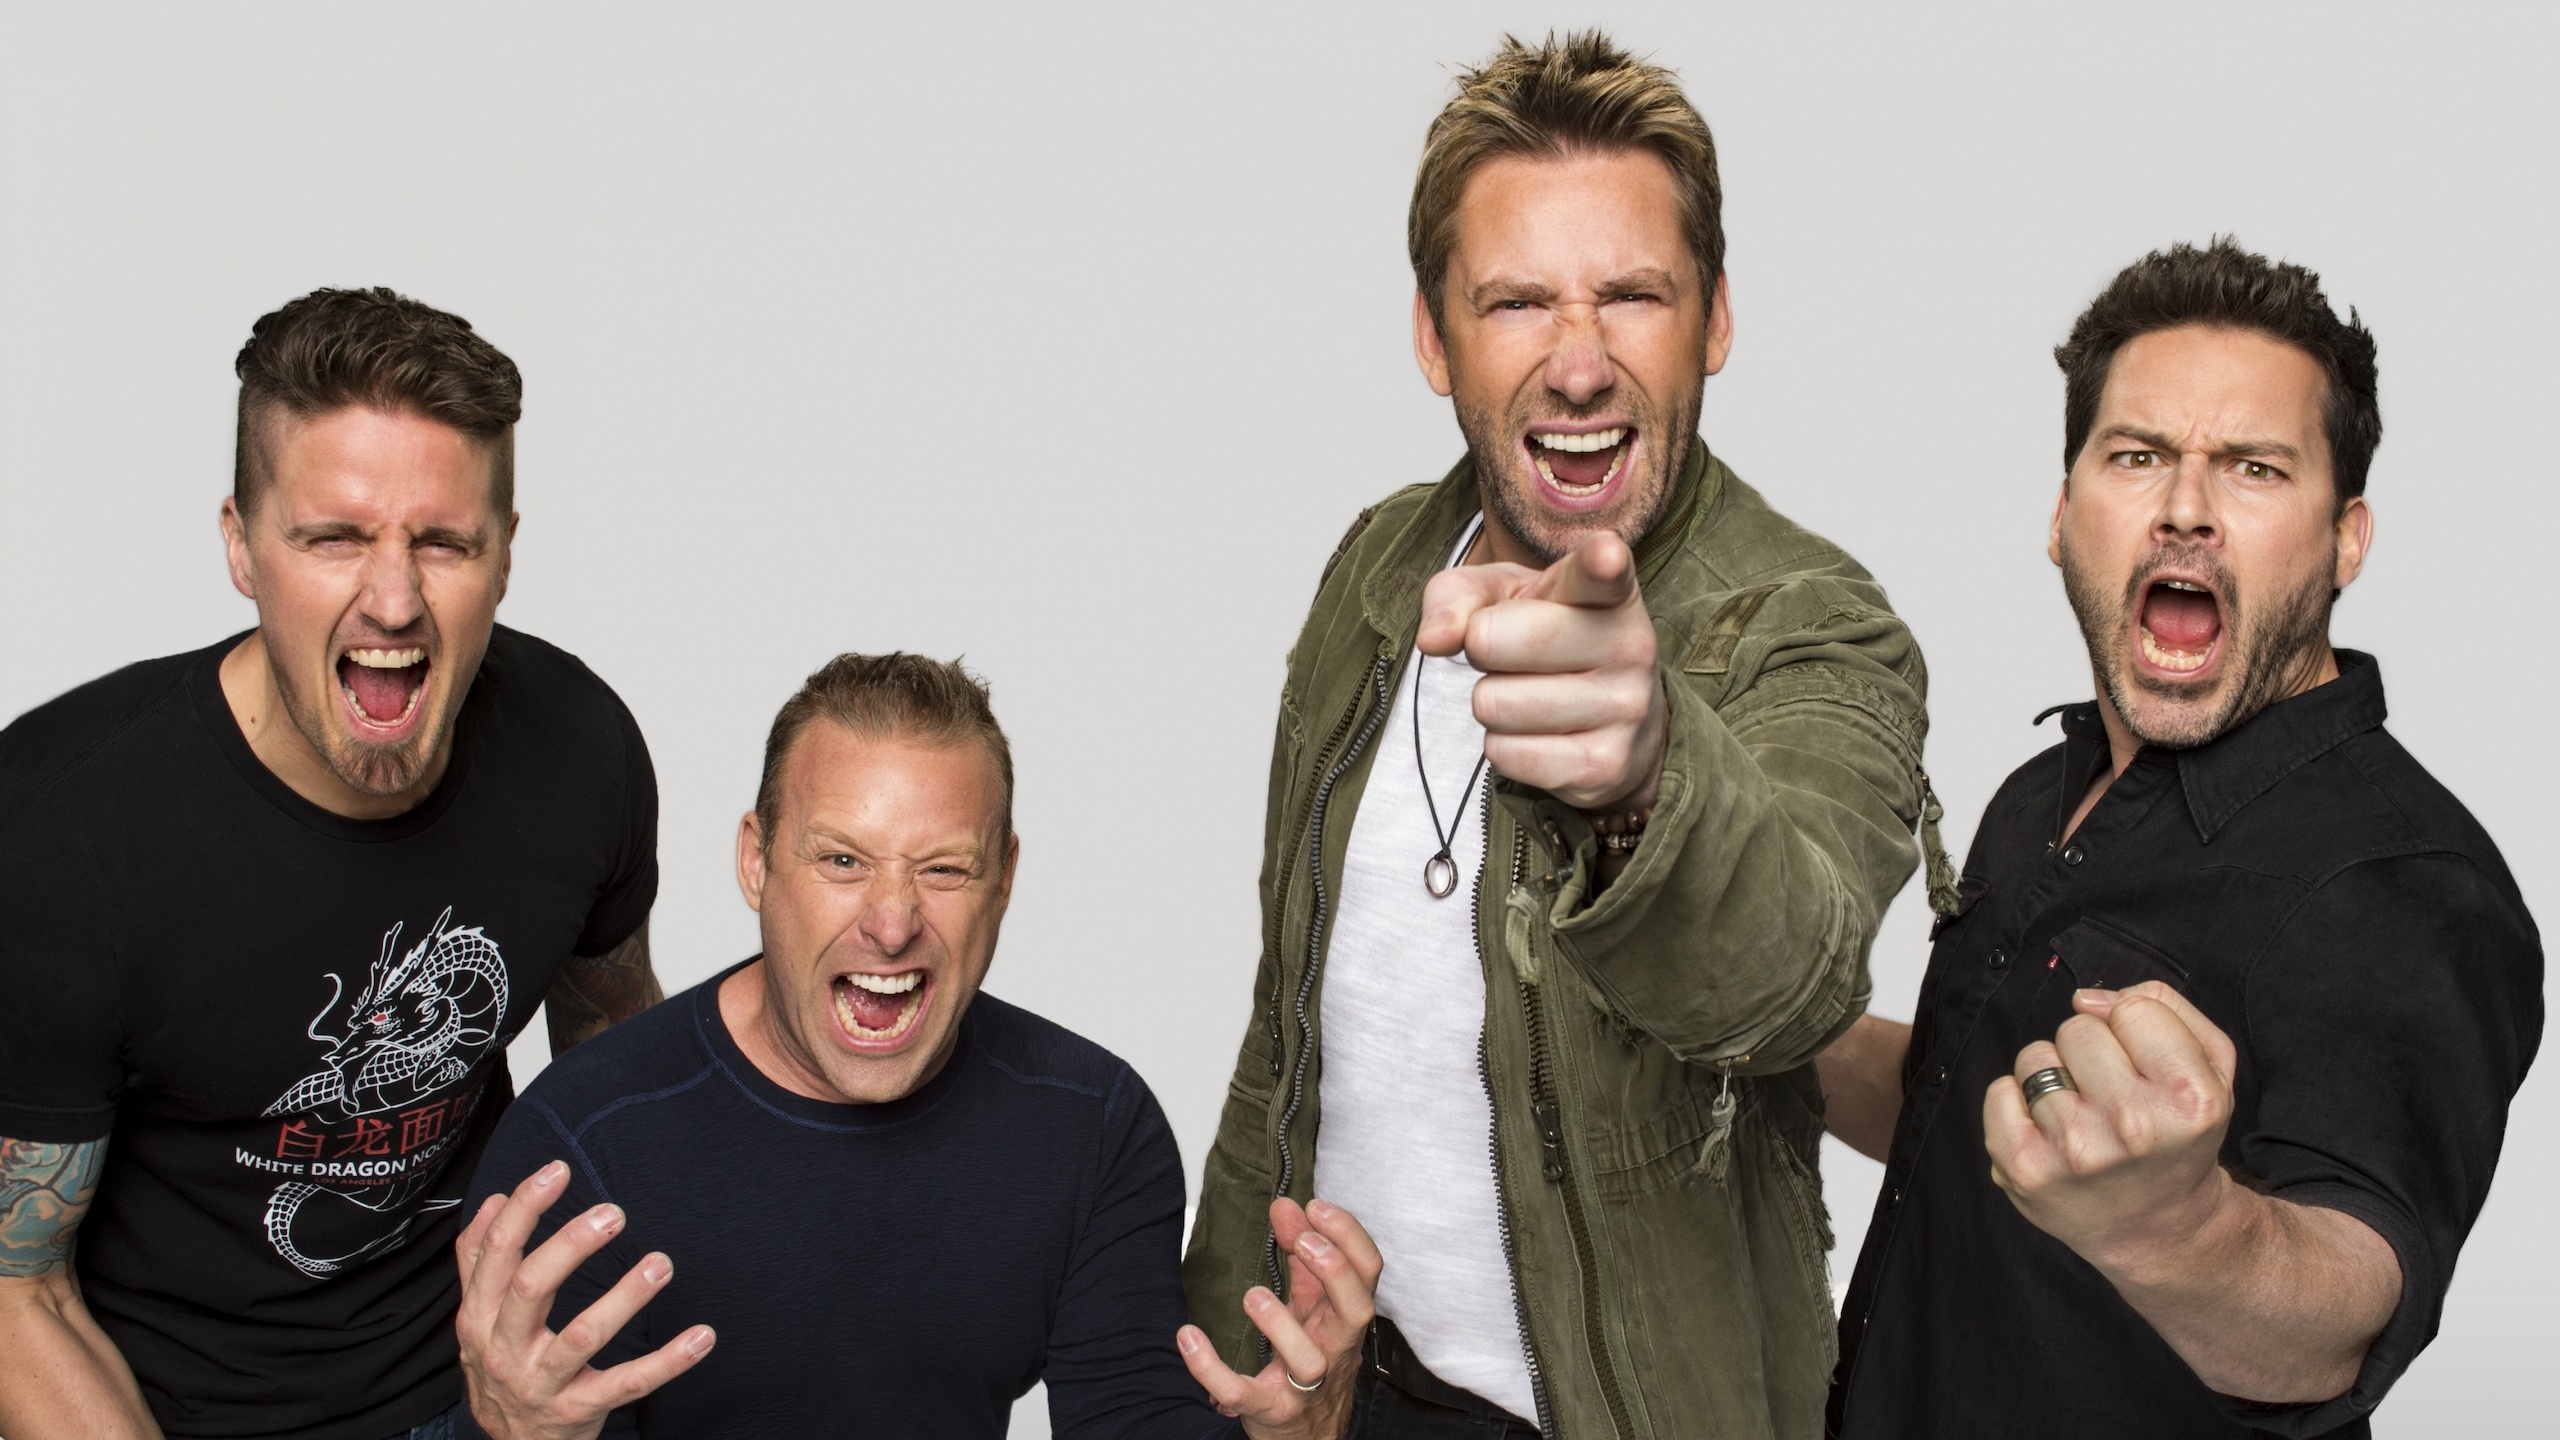 Nickelback: Signed to EMI in Canada and Roadrunner Records, Mike Kroeger. 2560x1440 HD Wallpaper.